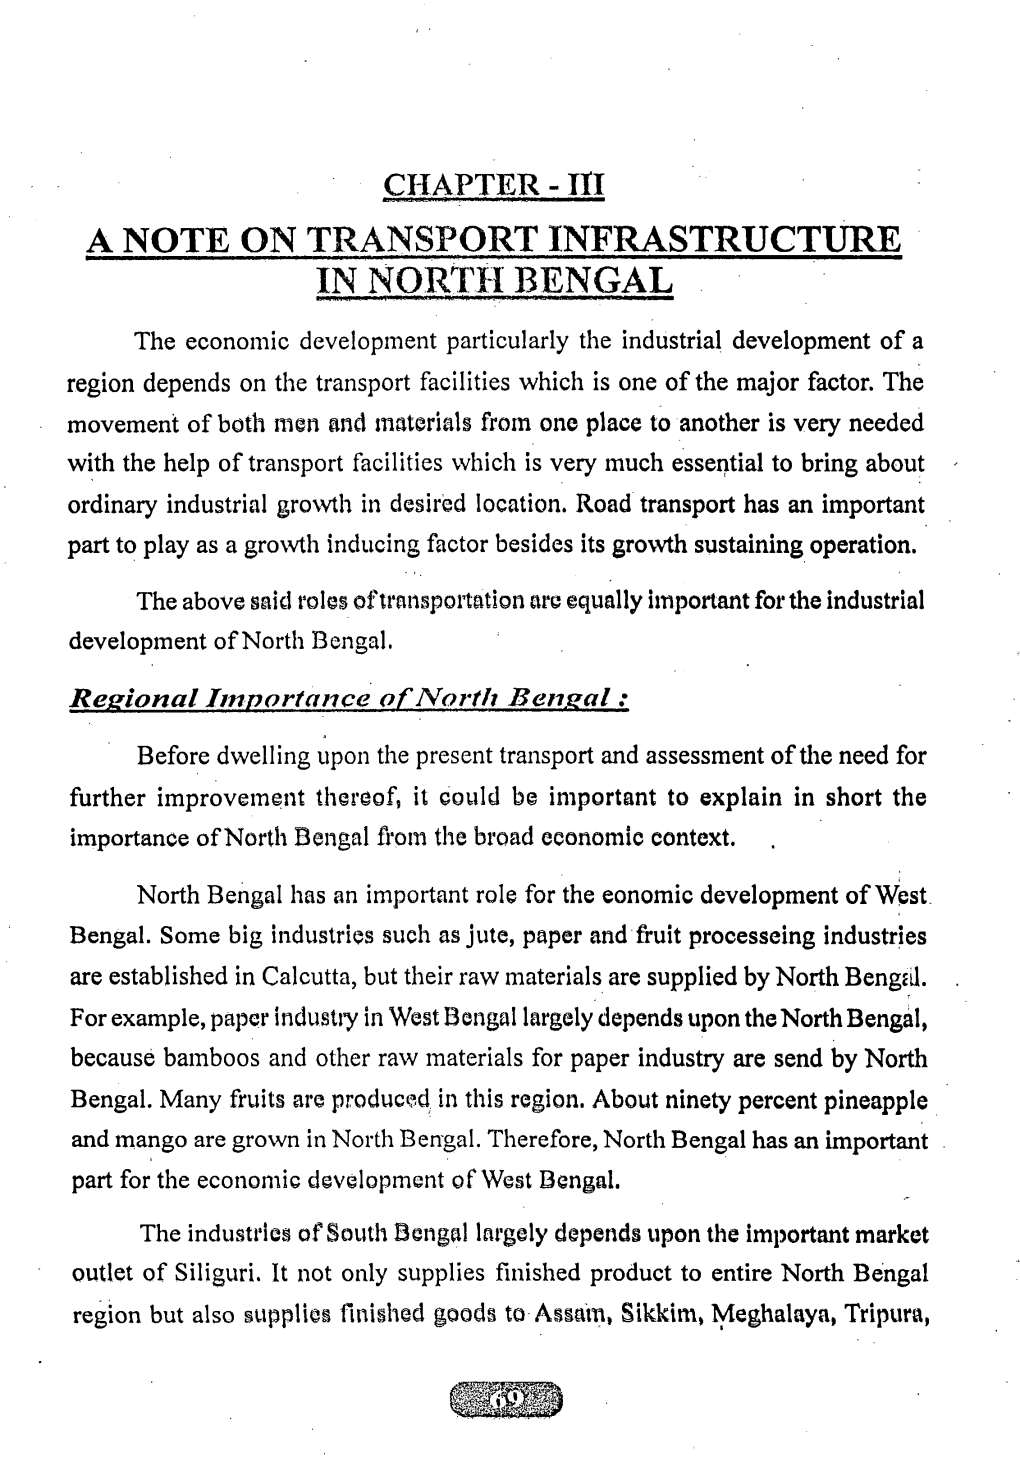 A NOTE on TRANSPORT INFRASTRUCTURE in NOR'rji BENGAL